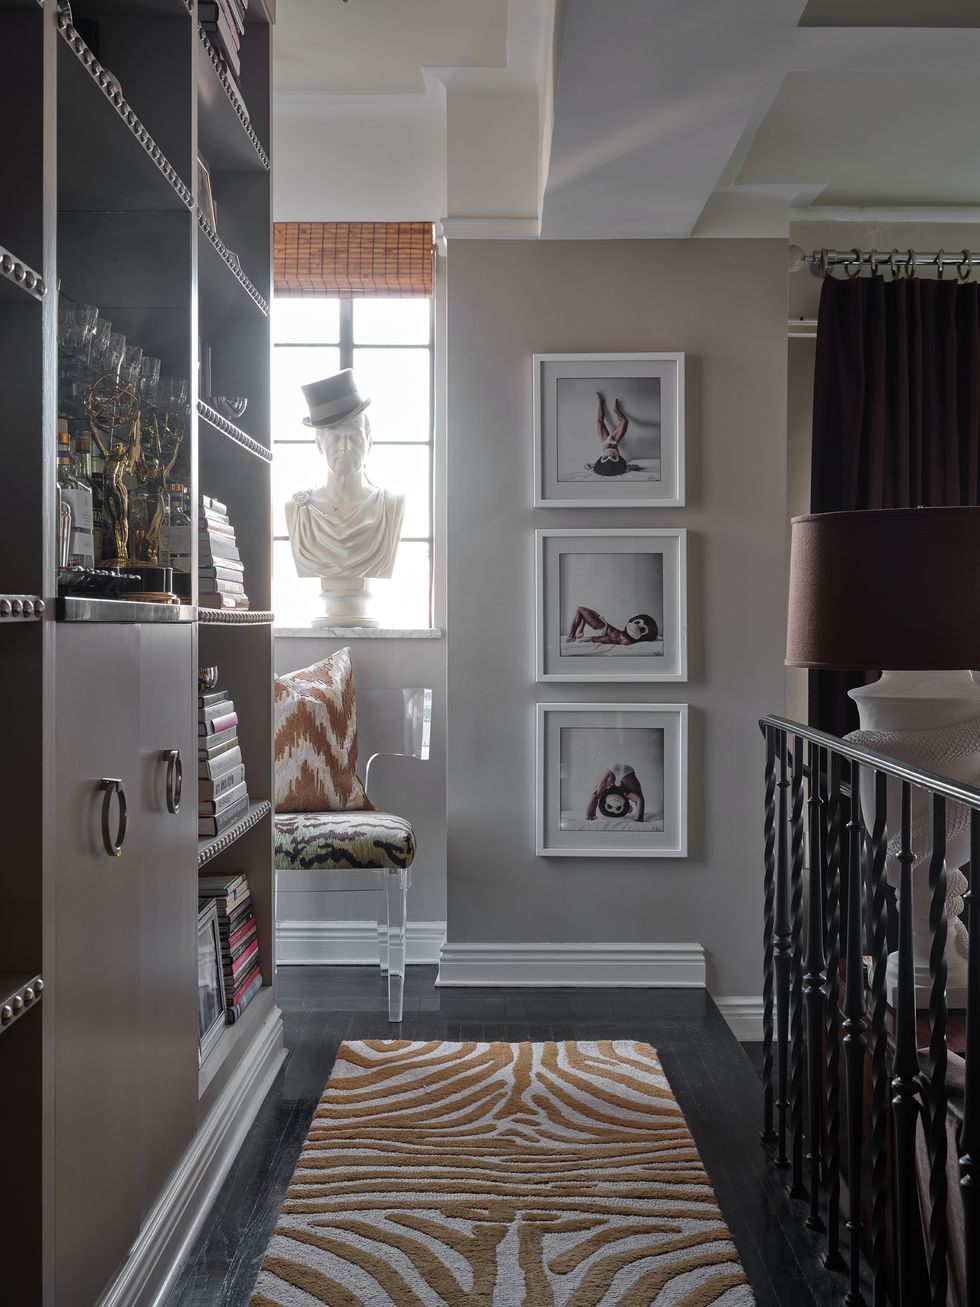 entryway with an animal print runner, art on the wall and cabinets on the side